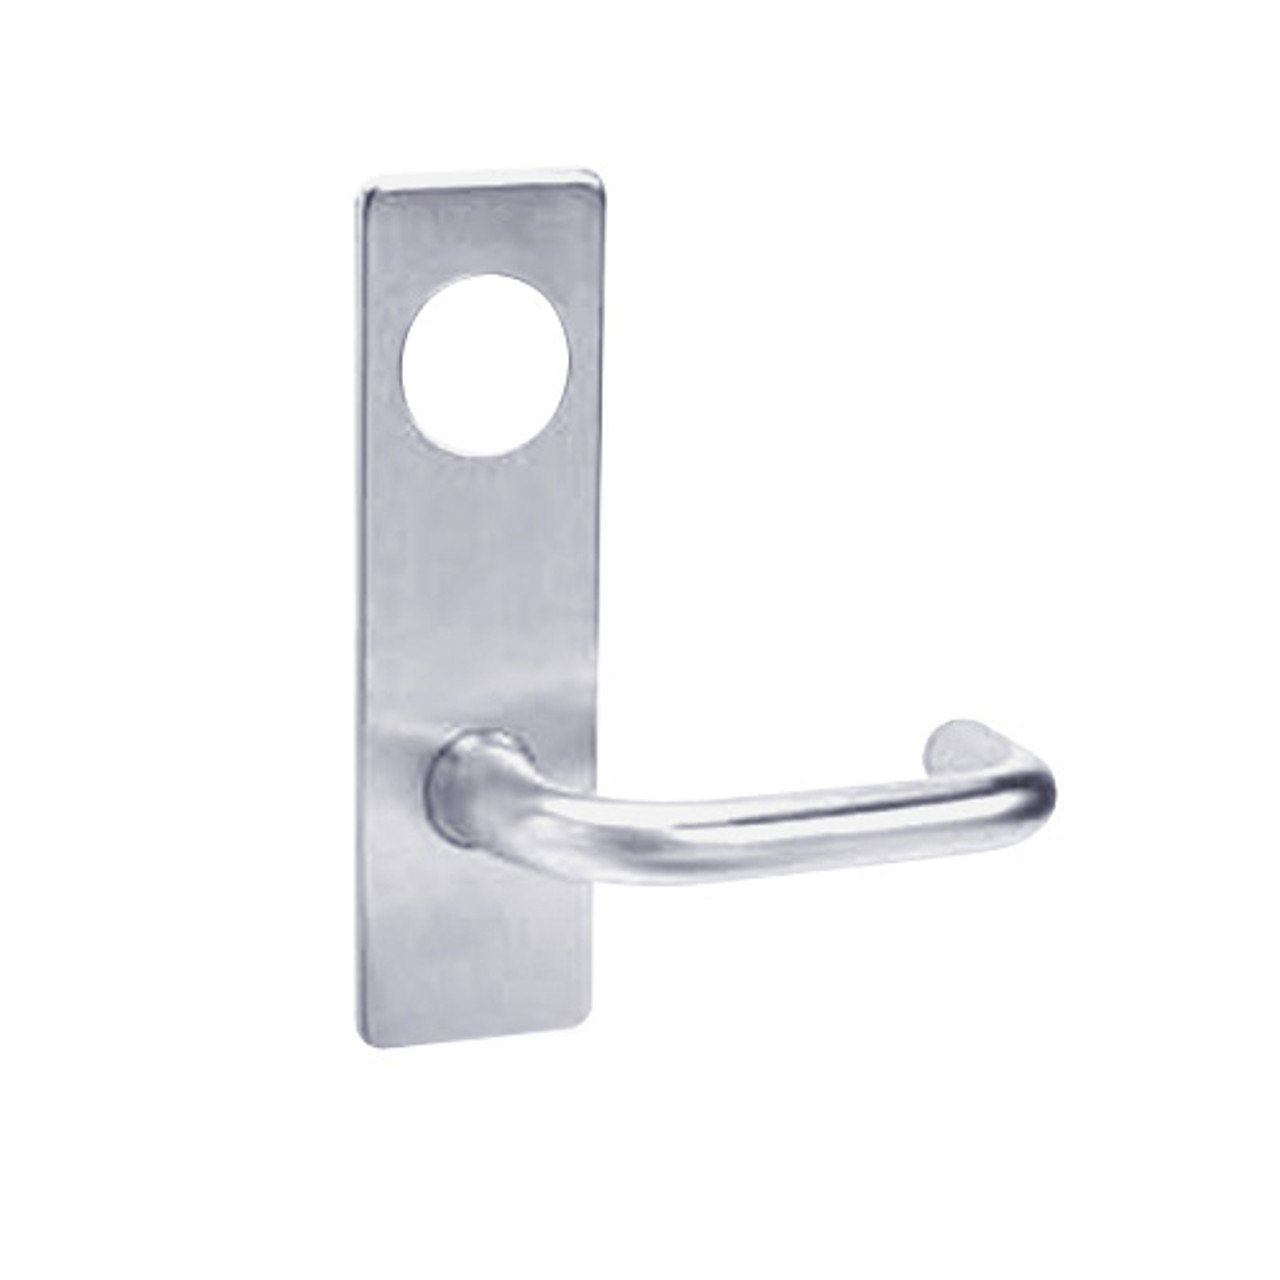 ML2069-LSR-626-LC Corbin Russwin ML2000 Series Mortise Institution Privacy Locksets with Lustra Lever in Satin Chrome